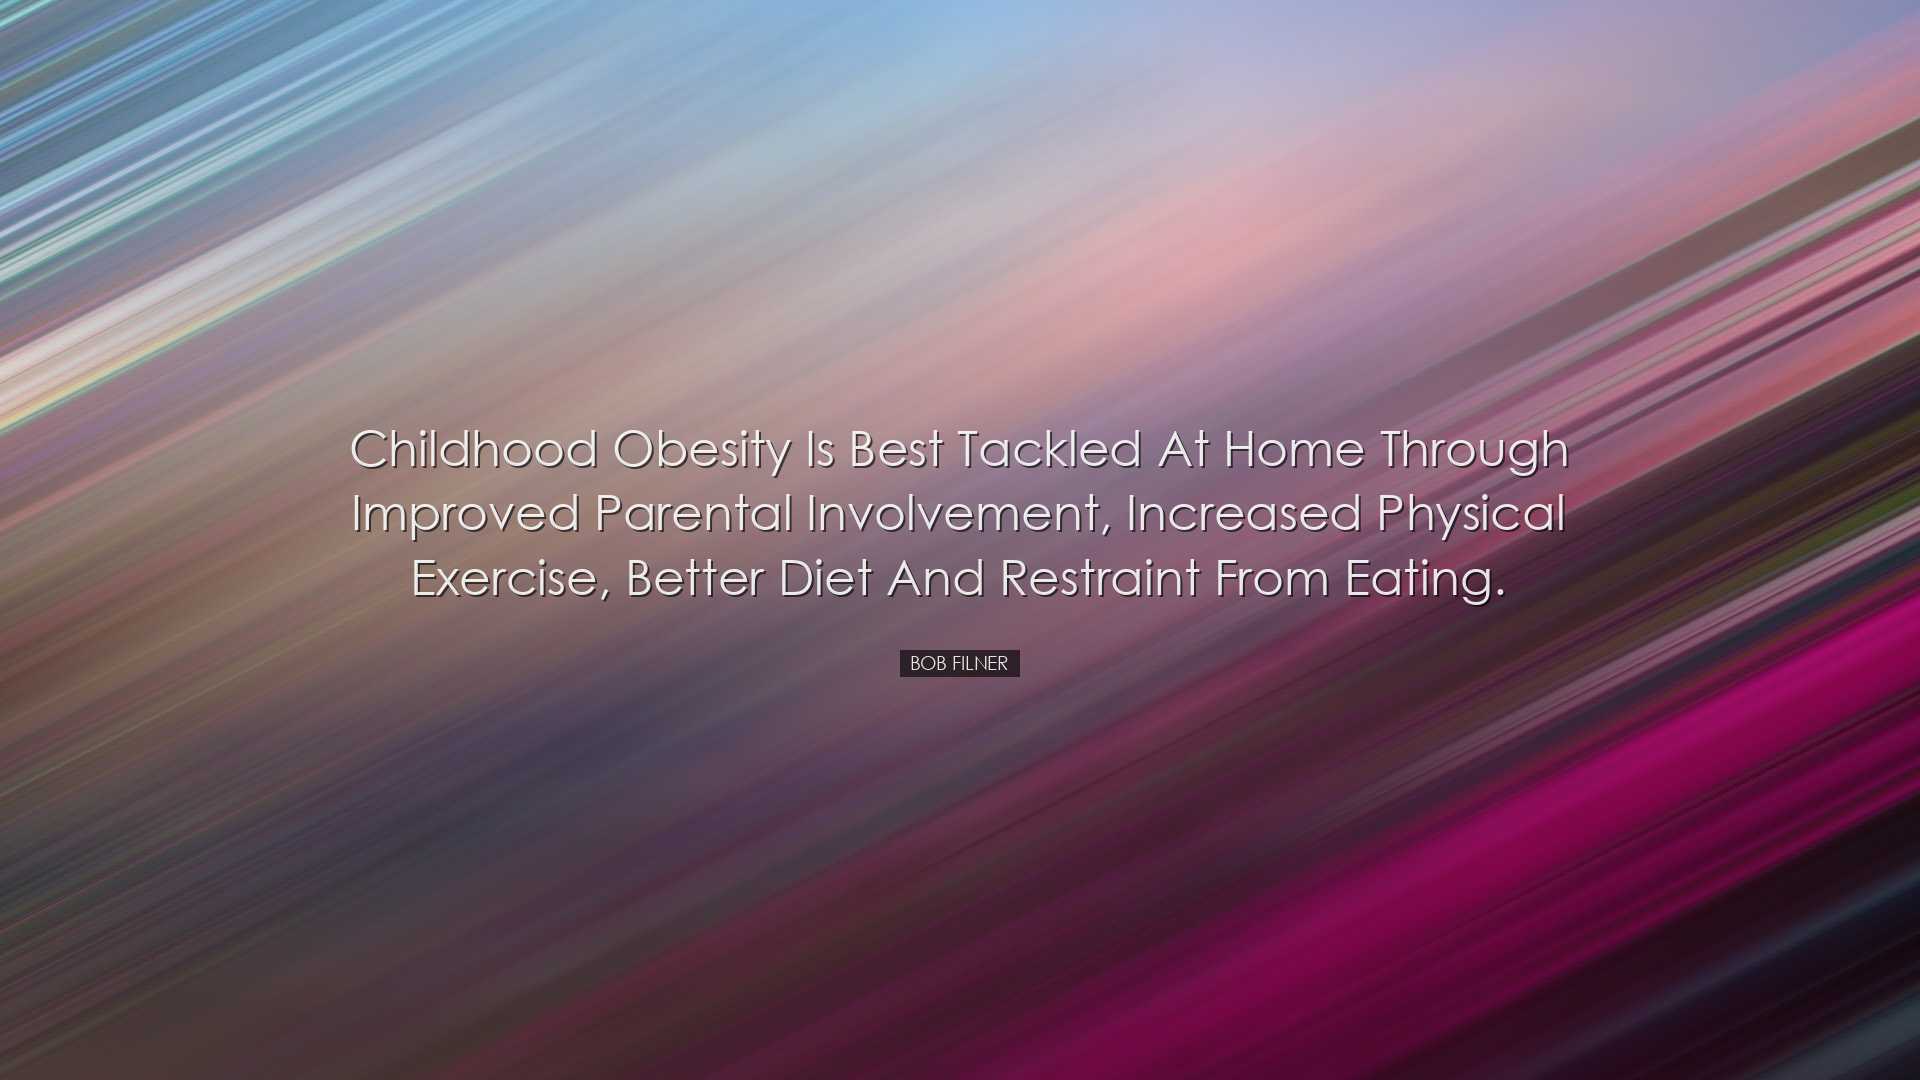 Childhood obesity is best tackled at home through improved parenta